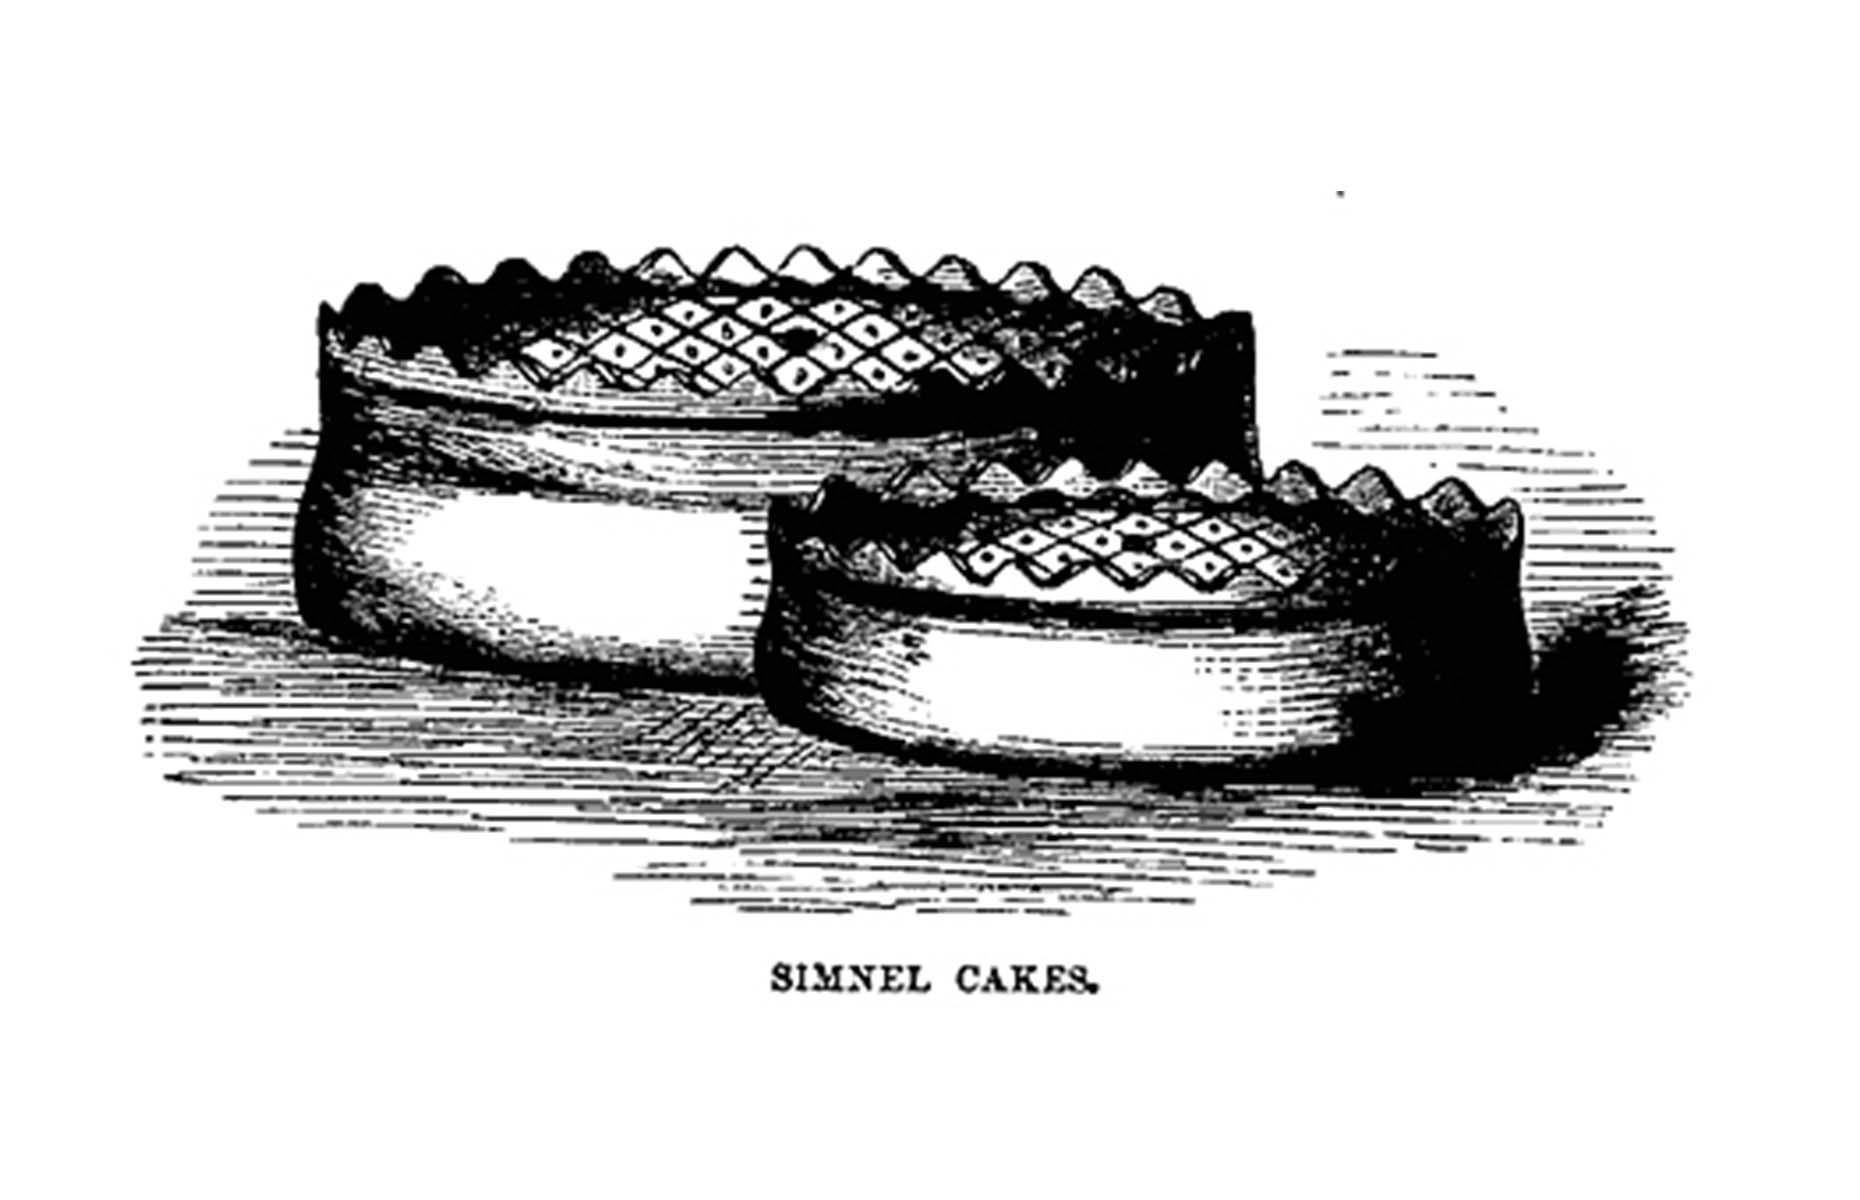 Illustration of simnel cake from a 19th-century book (Image: Unknown/Wikimedia Commons/CC0)